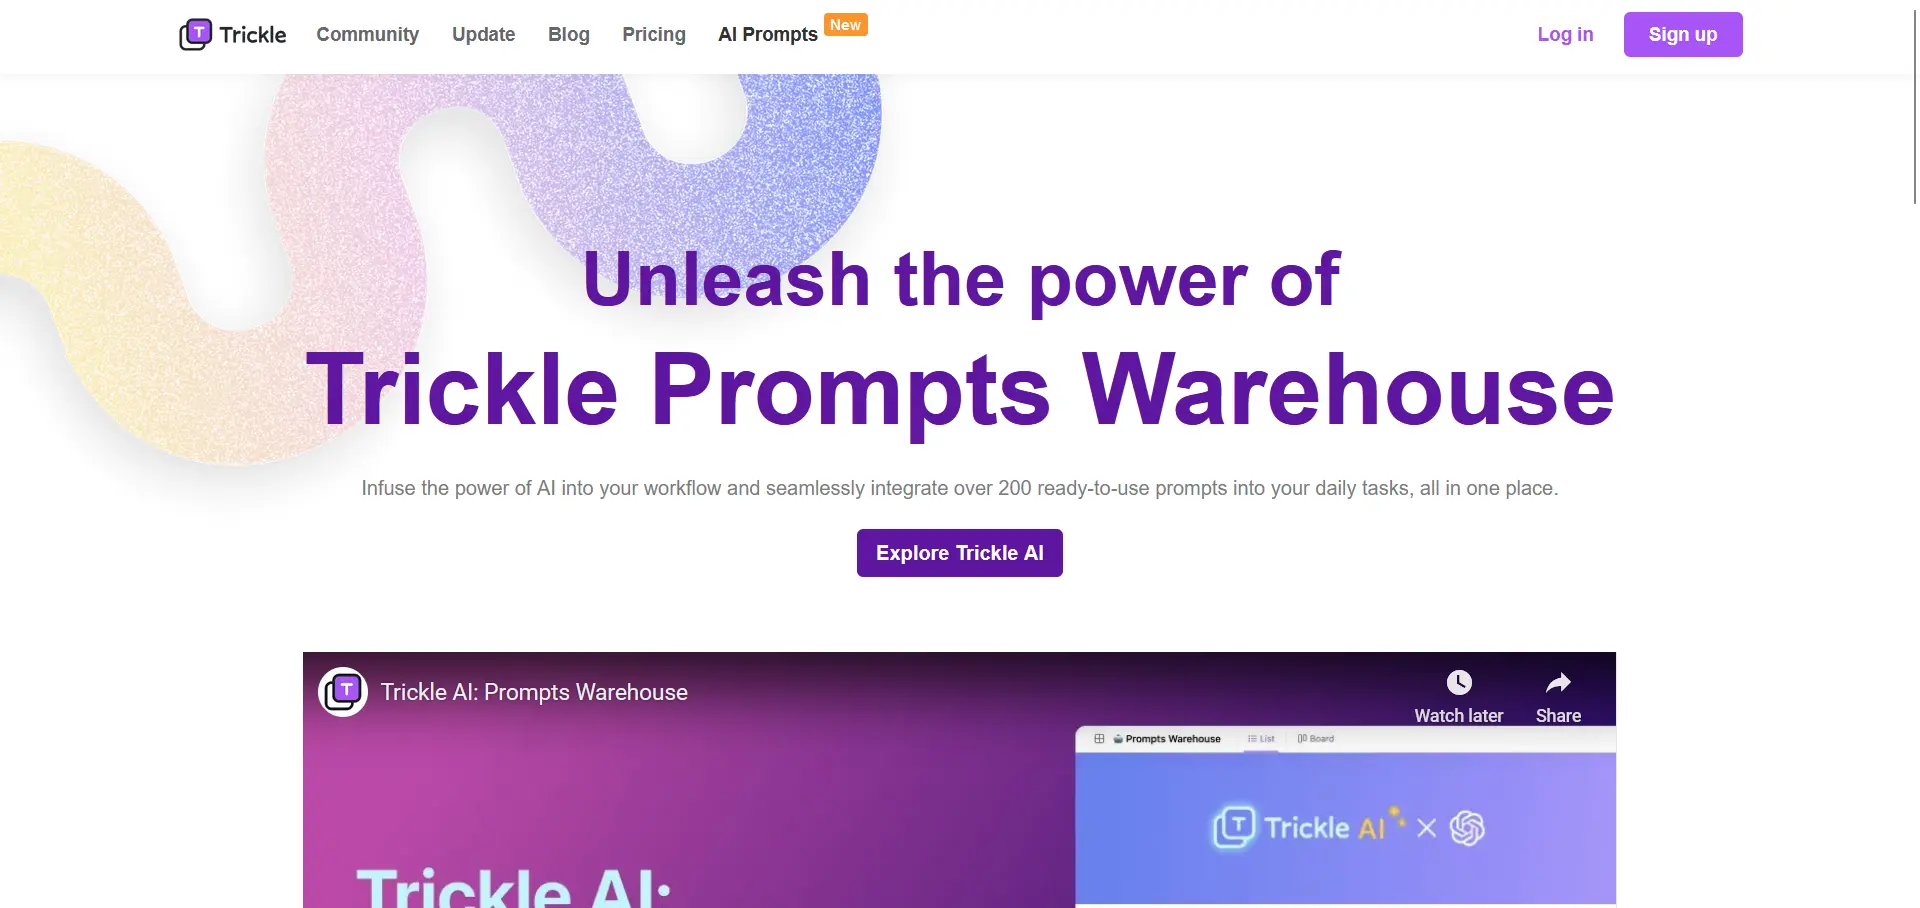 Trickle AI: Prompts Warehousewebsite picture